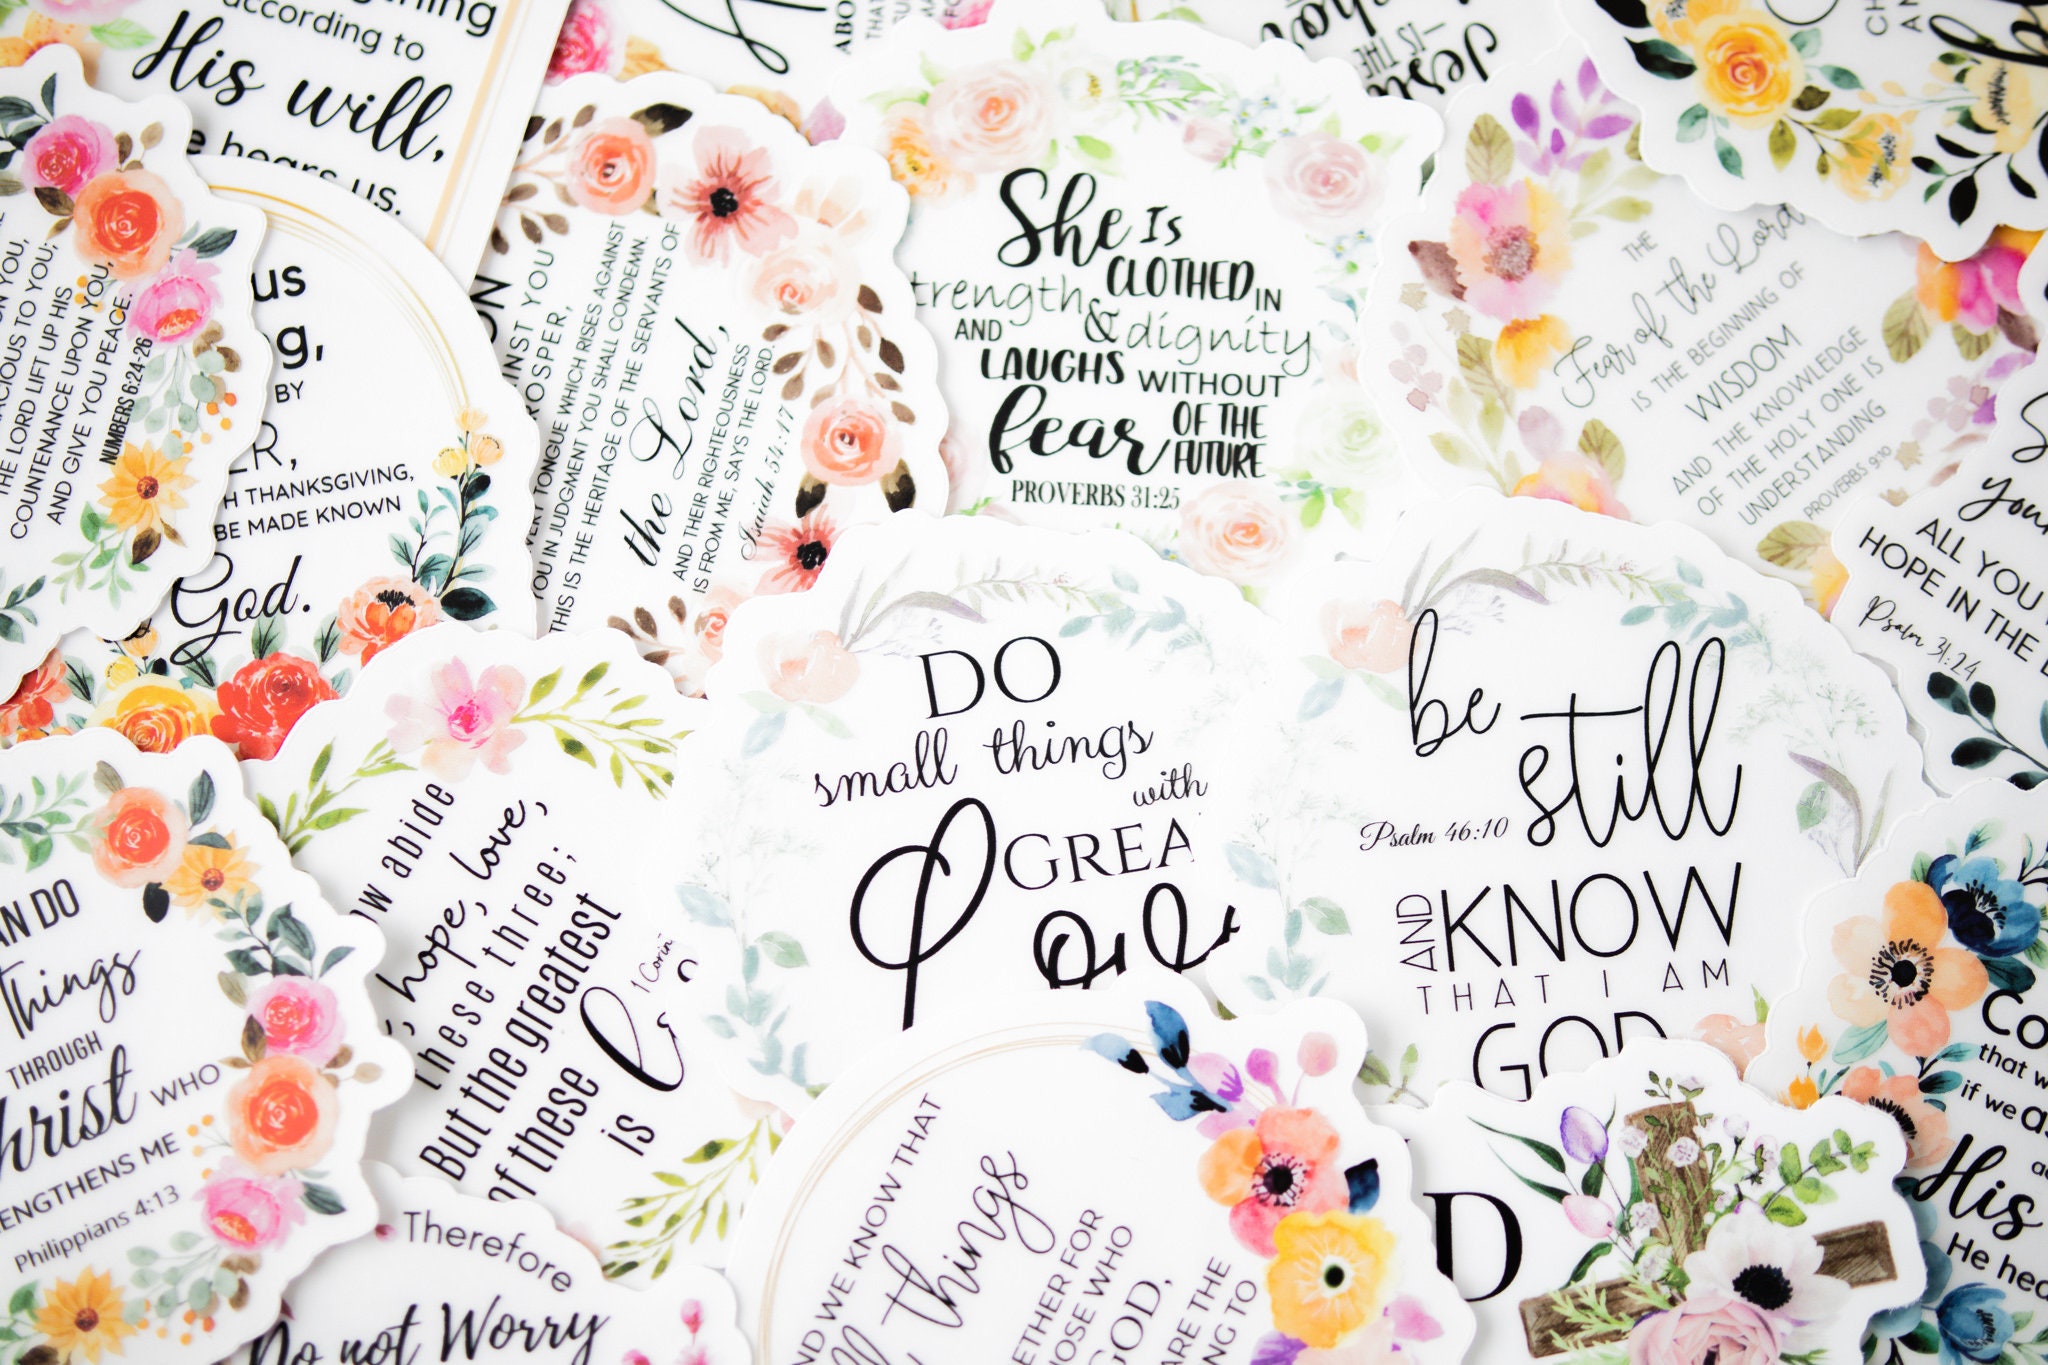 Sticker Paper Packs - Great for Making Bible Journaling Stickers - Great  for Stamping & Printing - For Your Bible Journaling! - ByTheWell4God